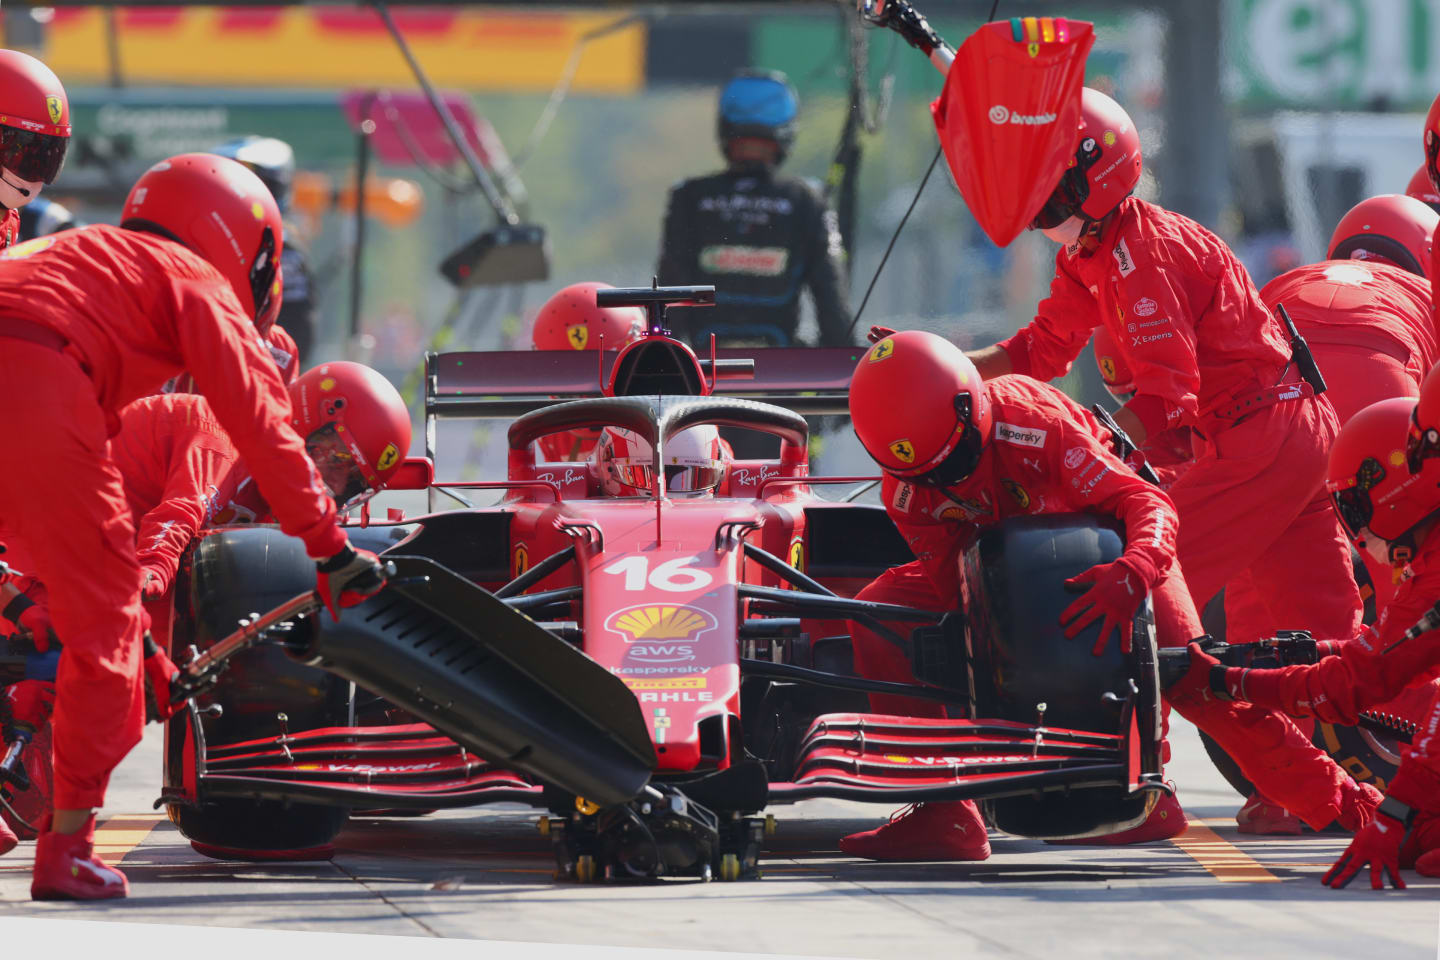 MONZA, ITALY - SEPTEMBER 12: Charles Leclerc of Monaco driving the (16) Scuderia Ferrari SF21 makes a pitstop during the F1 Grand Prix of Italy at Autodromo di Monza on September 12, 2021 in Monza, Italy. (Photo by Peter Fox/Getty Images)